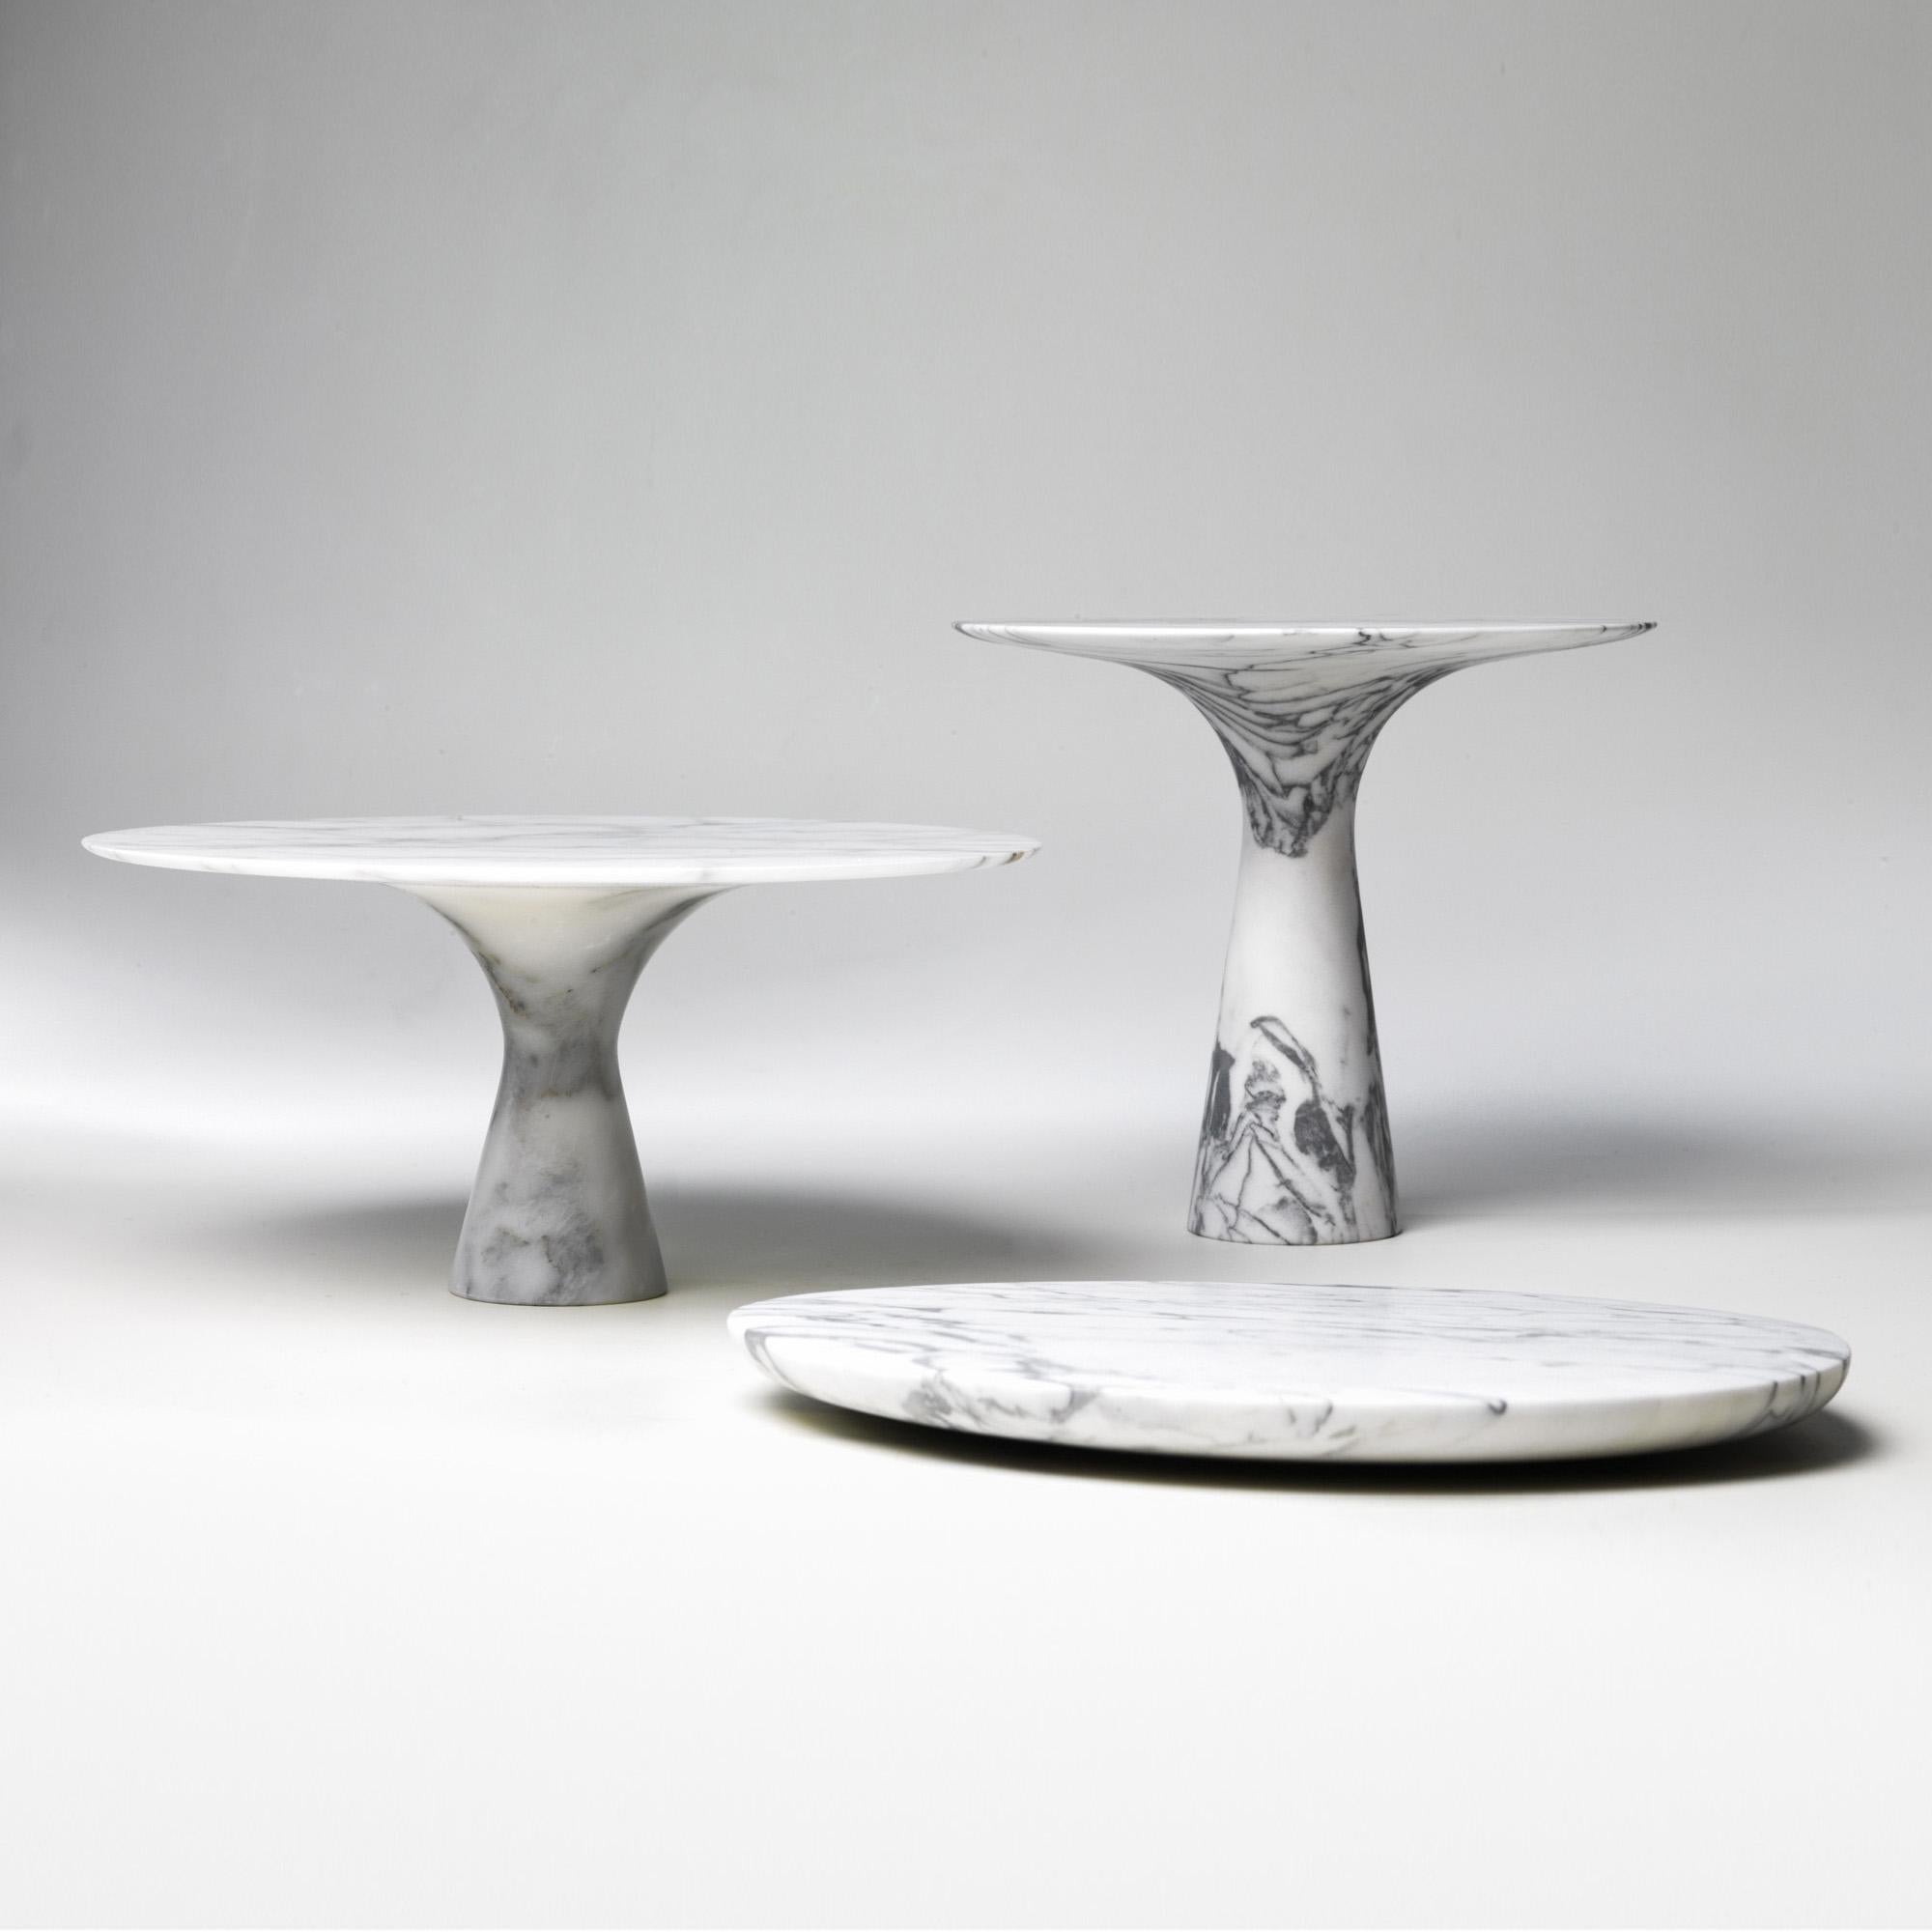 Set of 3 Refined Contemporary Marble Travertino Silver Cake Stands and Plate For Sale 3